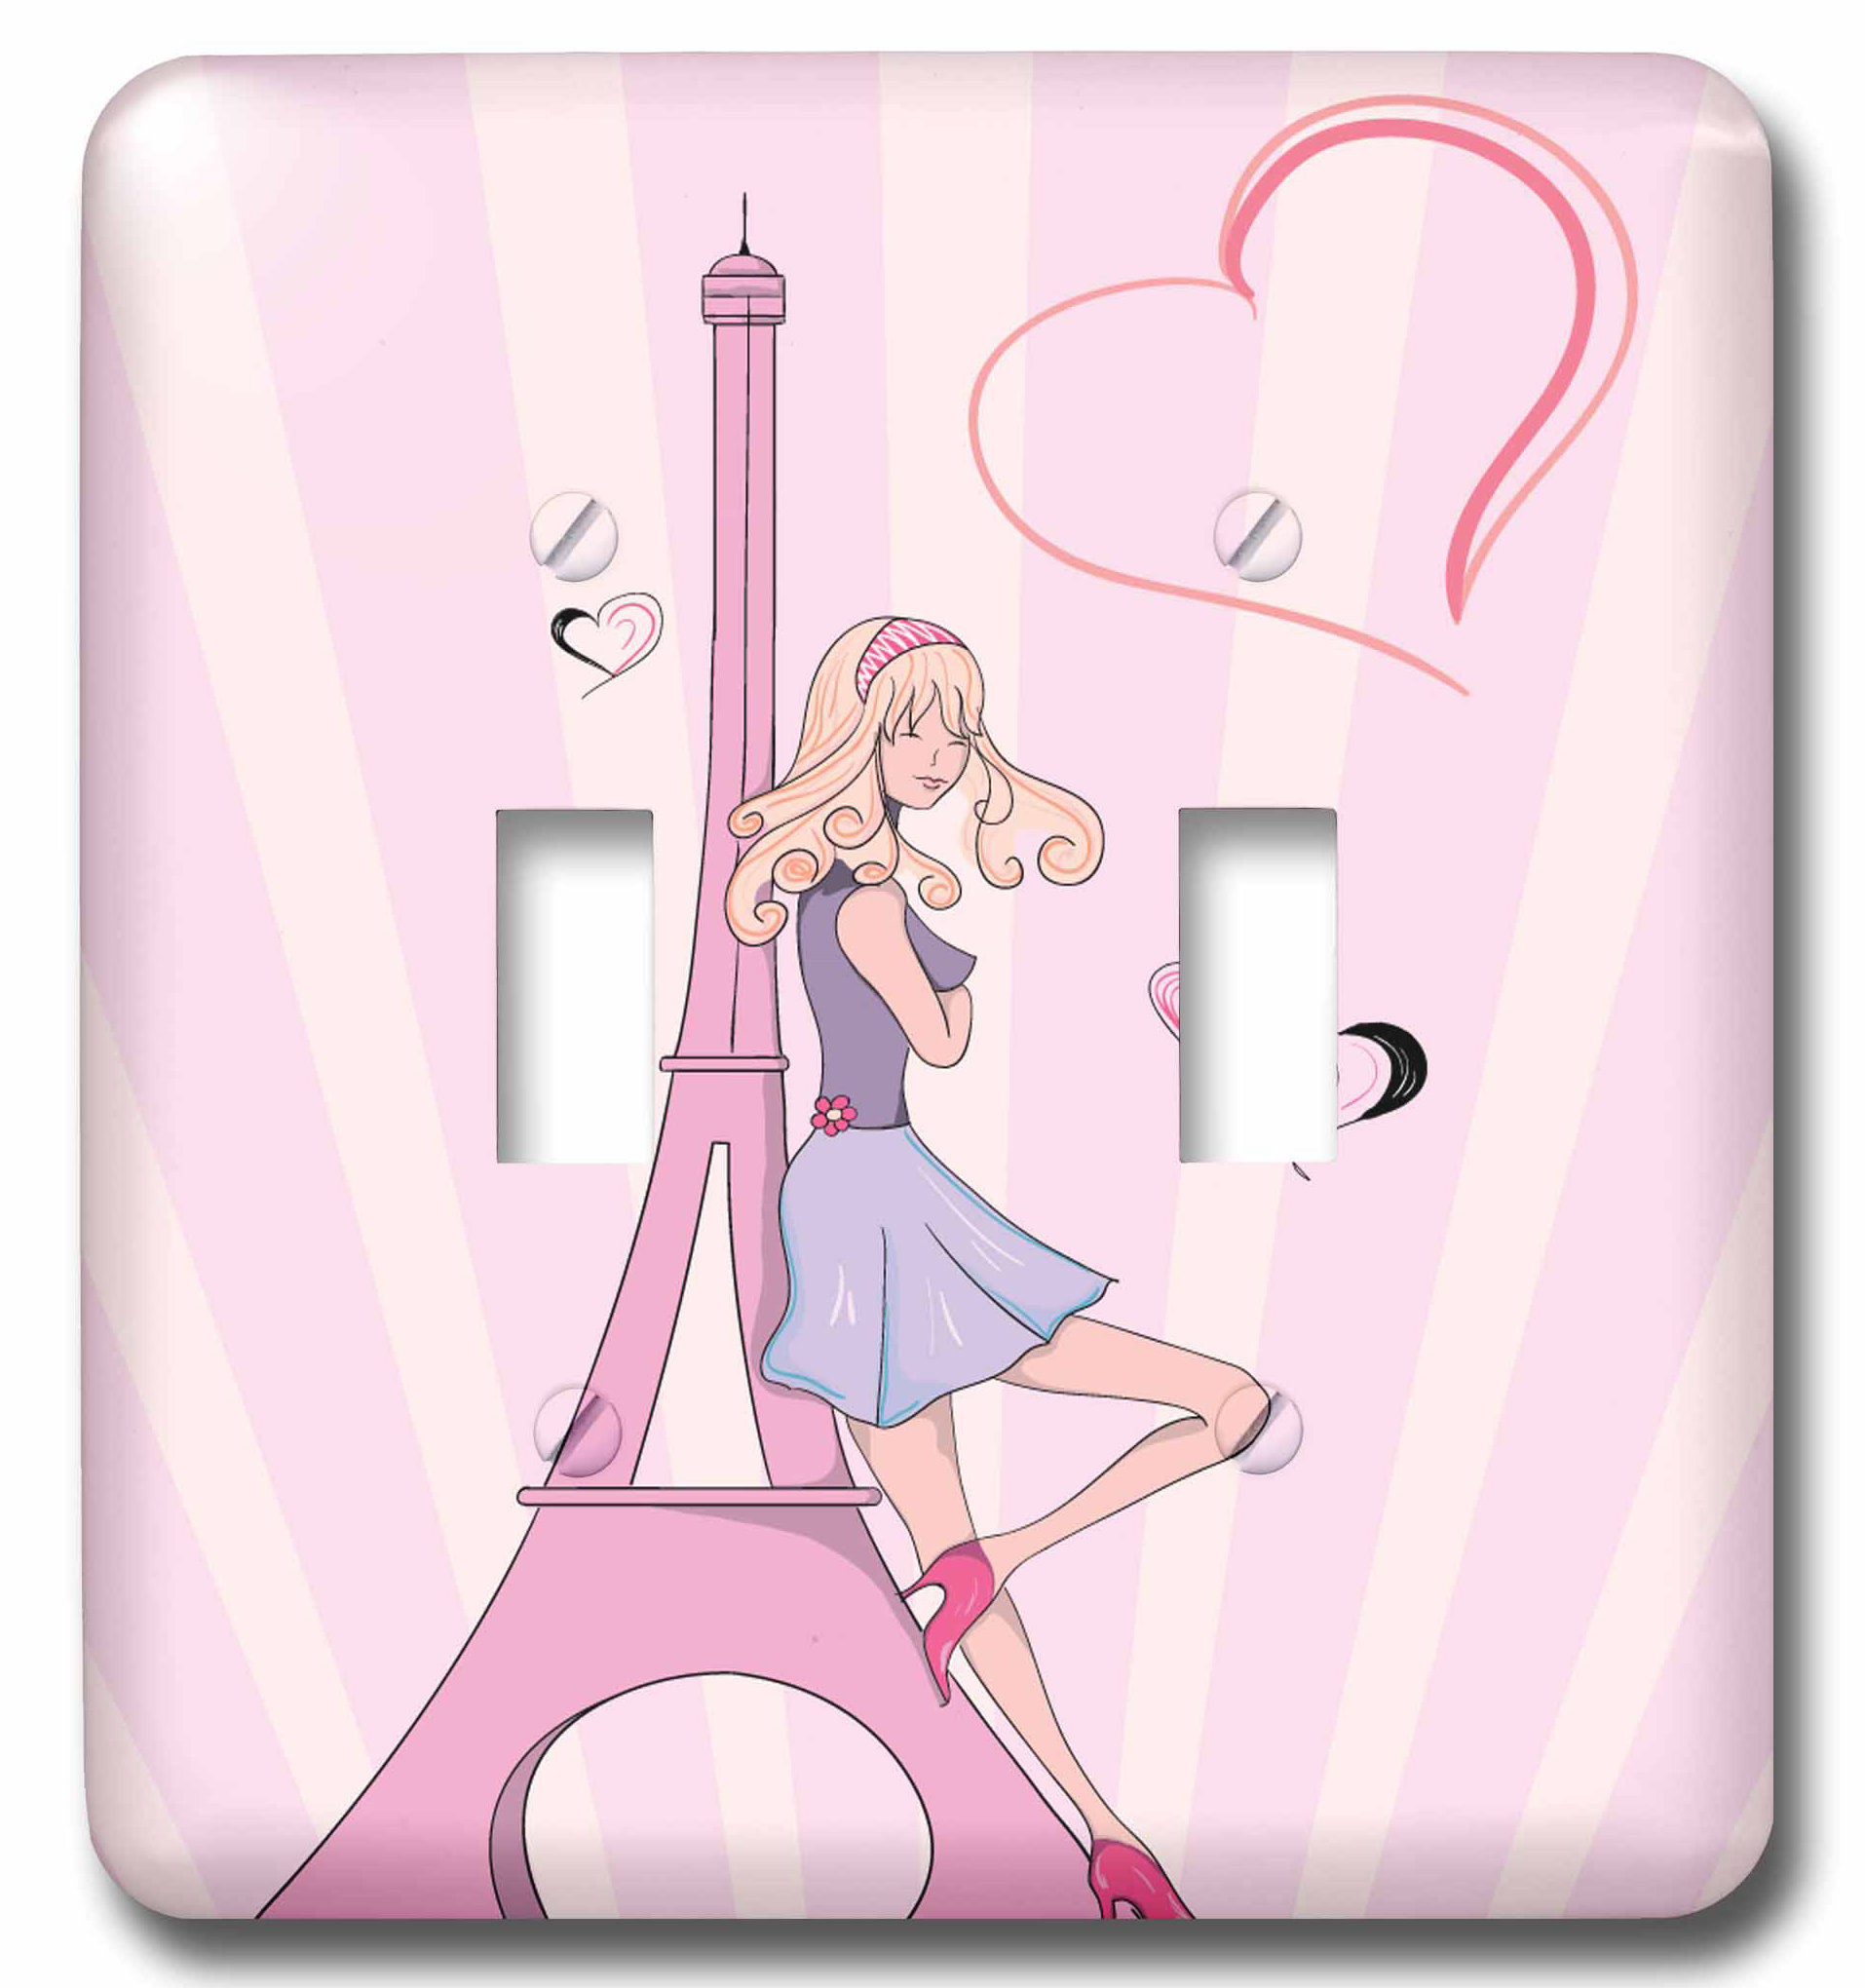 Wall Plate Little Girl In Paris Switch Plate Light Switch Cover Decorative Outlet Cover for Living Room Bedroom Kitchen 